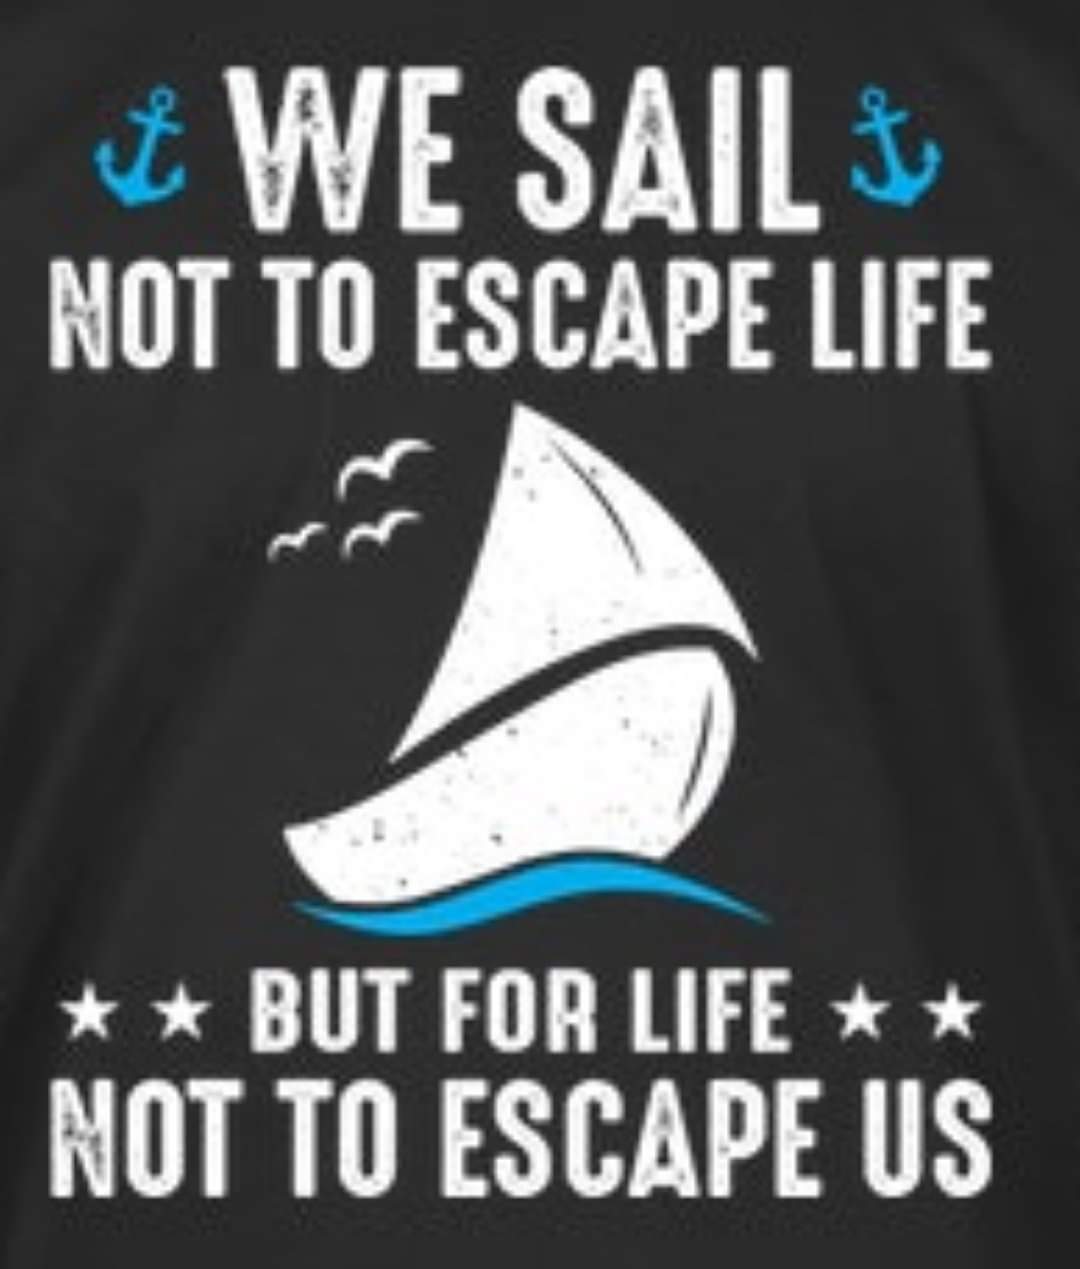 sail_for_life_not_to_escape_us.jpg